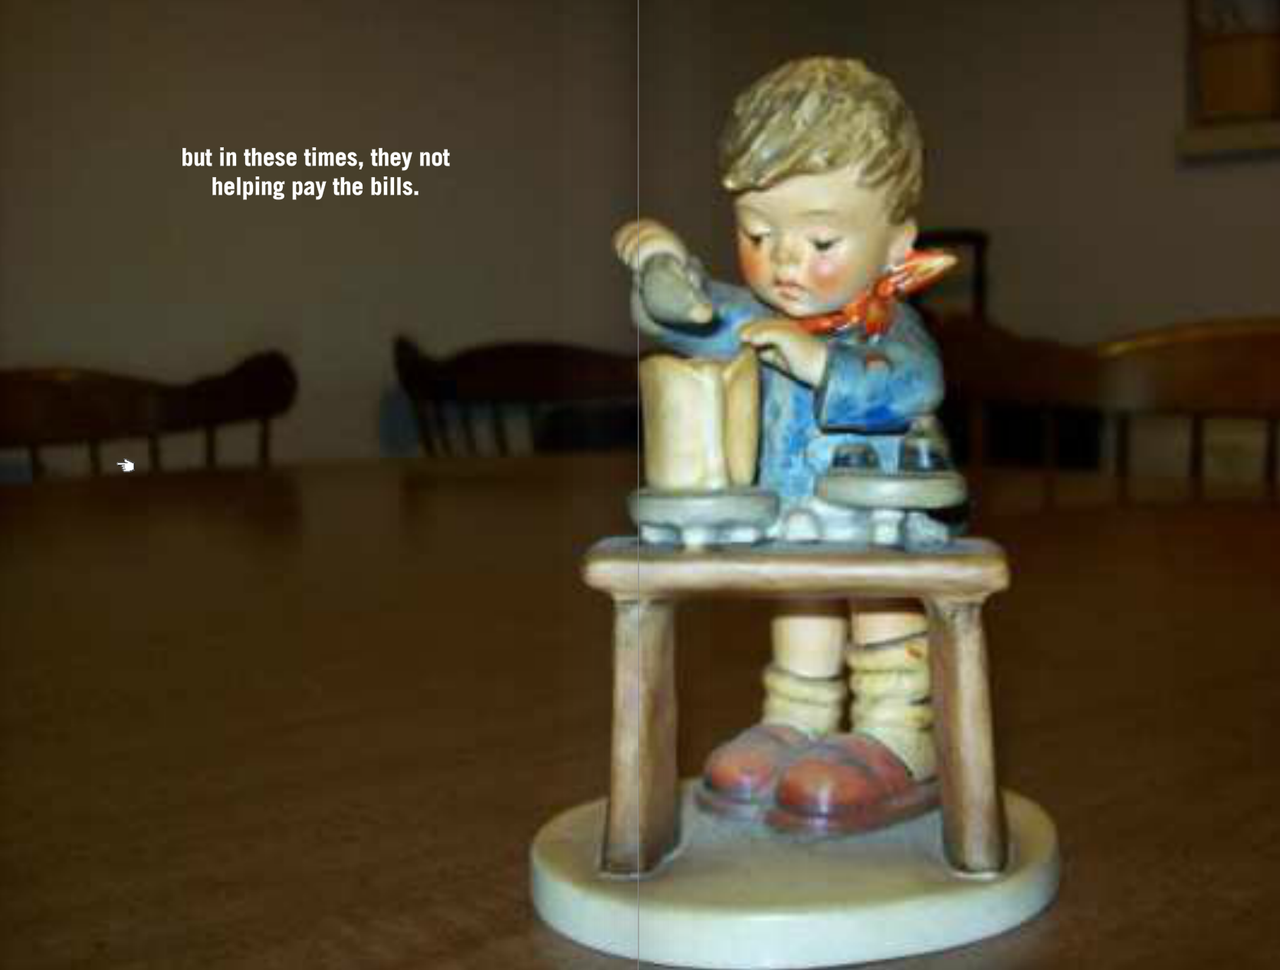 A small ceramic figurine of a child, with the textt: but in these times, they not helping pay the bills